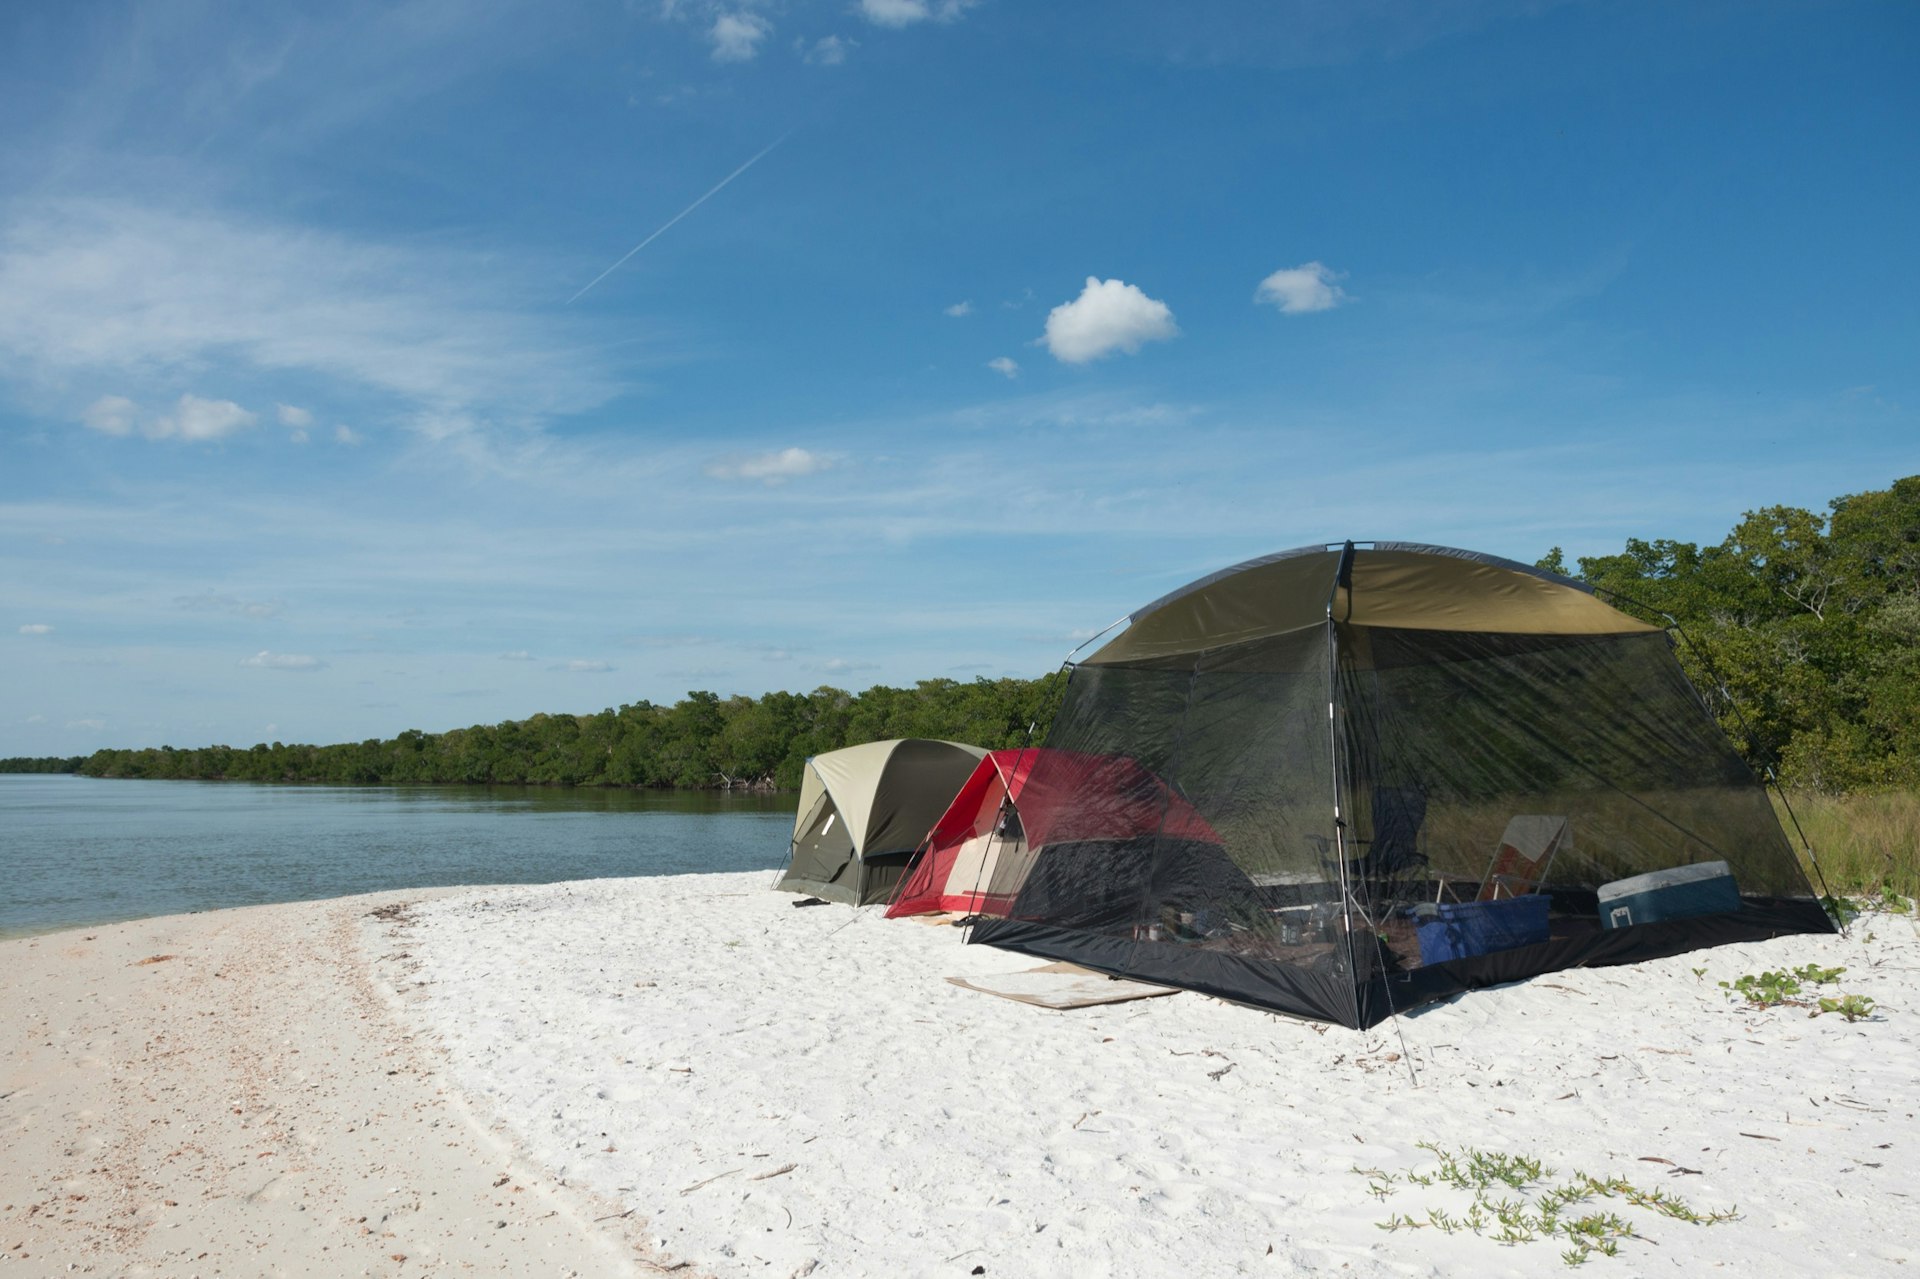 Camping in the Ten Thousand Islands